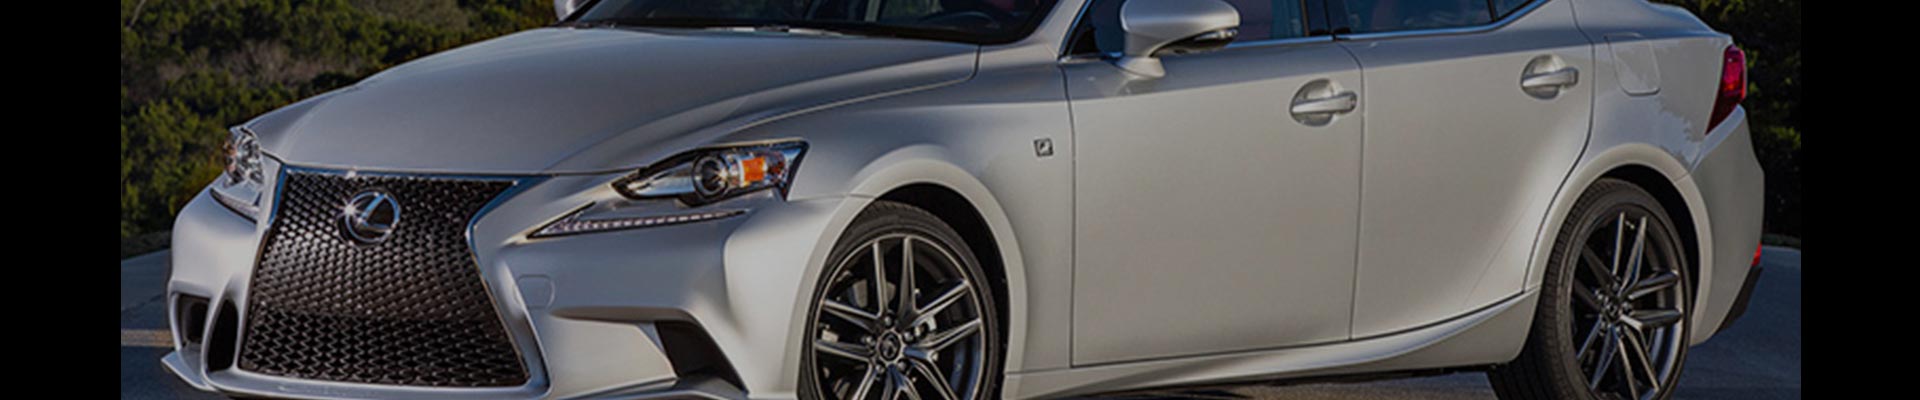 Shop Replacement and OEM 2012 Lexus IS350 Parts with Discounted Price on the Net